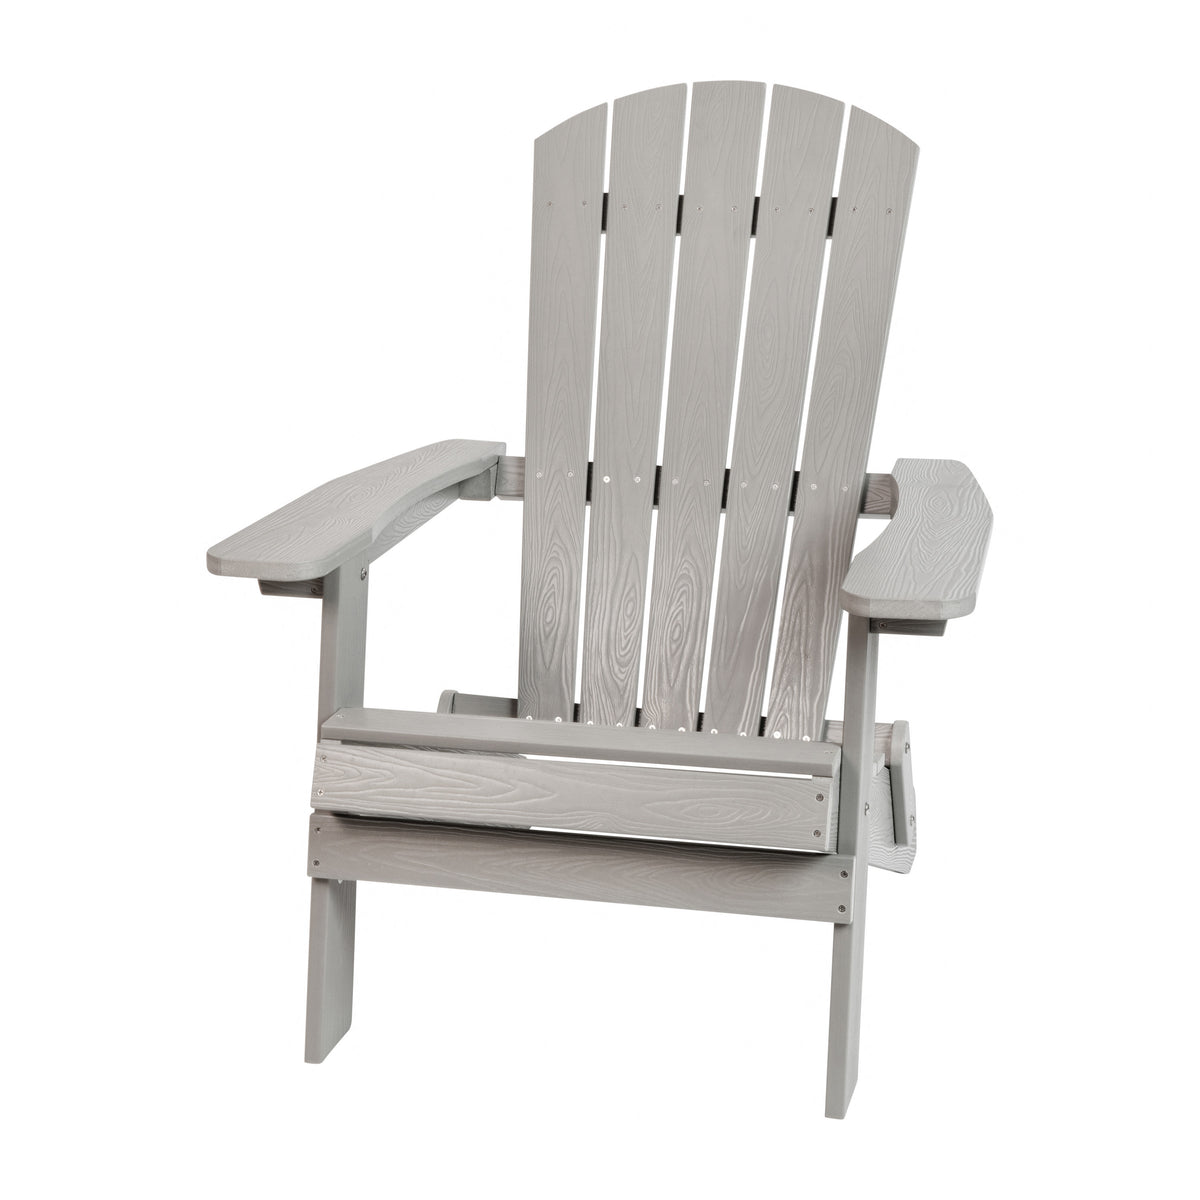 Gray |#| Set of 2 Indoor/Outdoor Folding Adirondack Chairs with Side Table in Gray